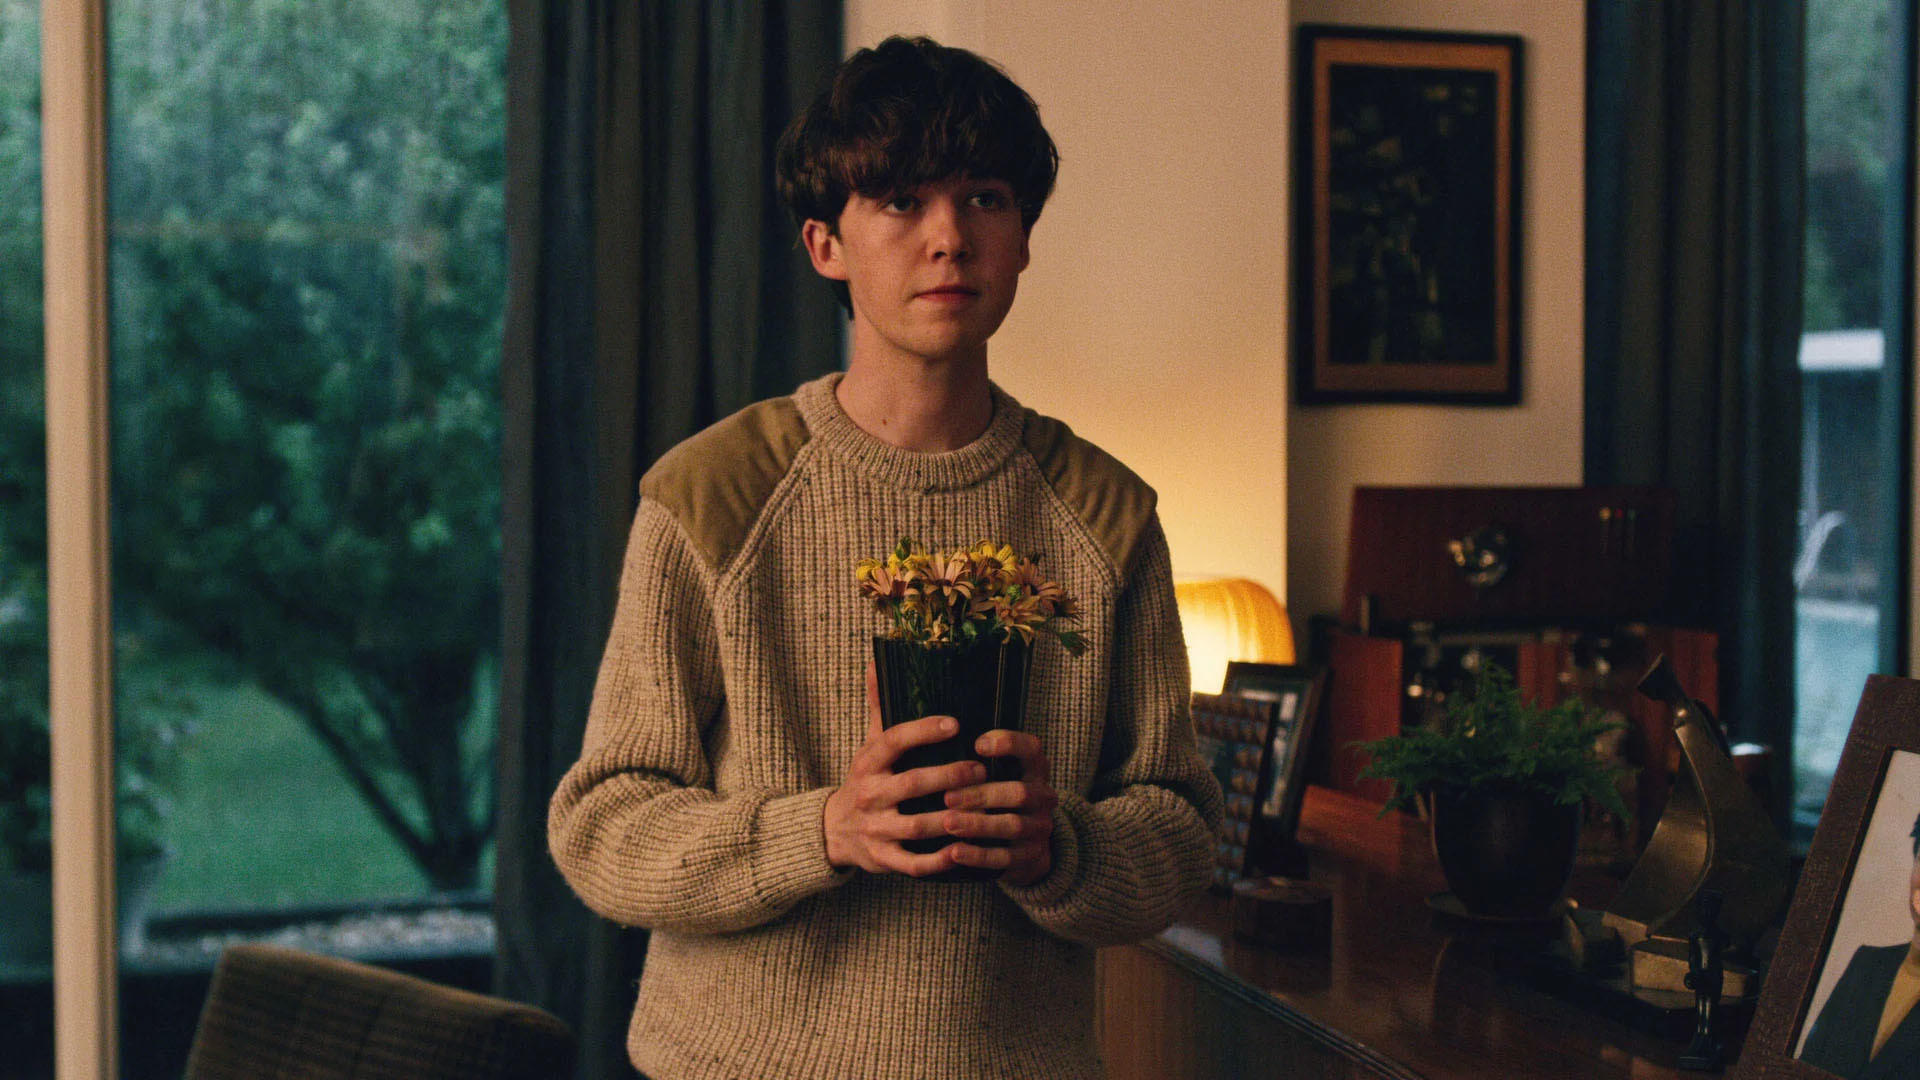 The End of the F***ing World (S01E03): Season 1, Episode 3 Summary.